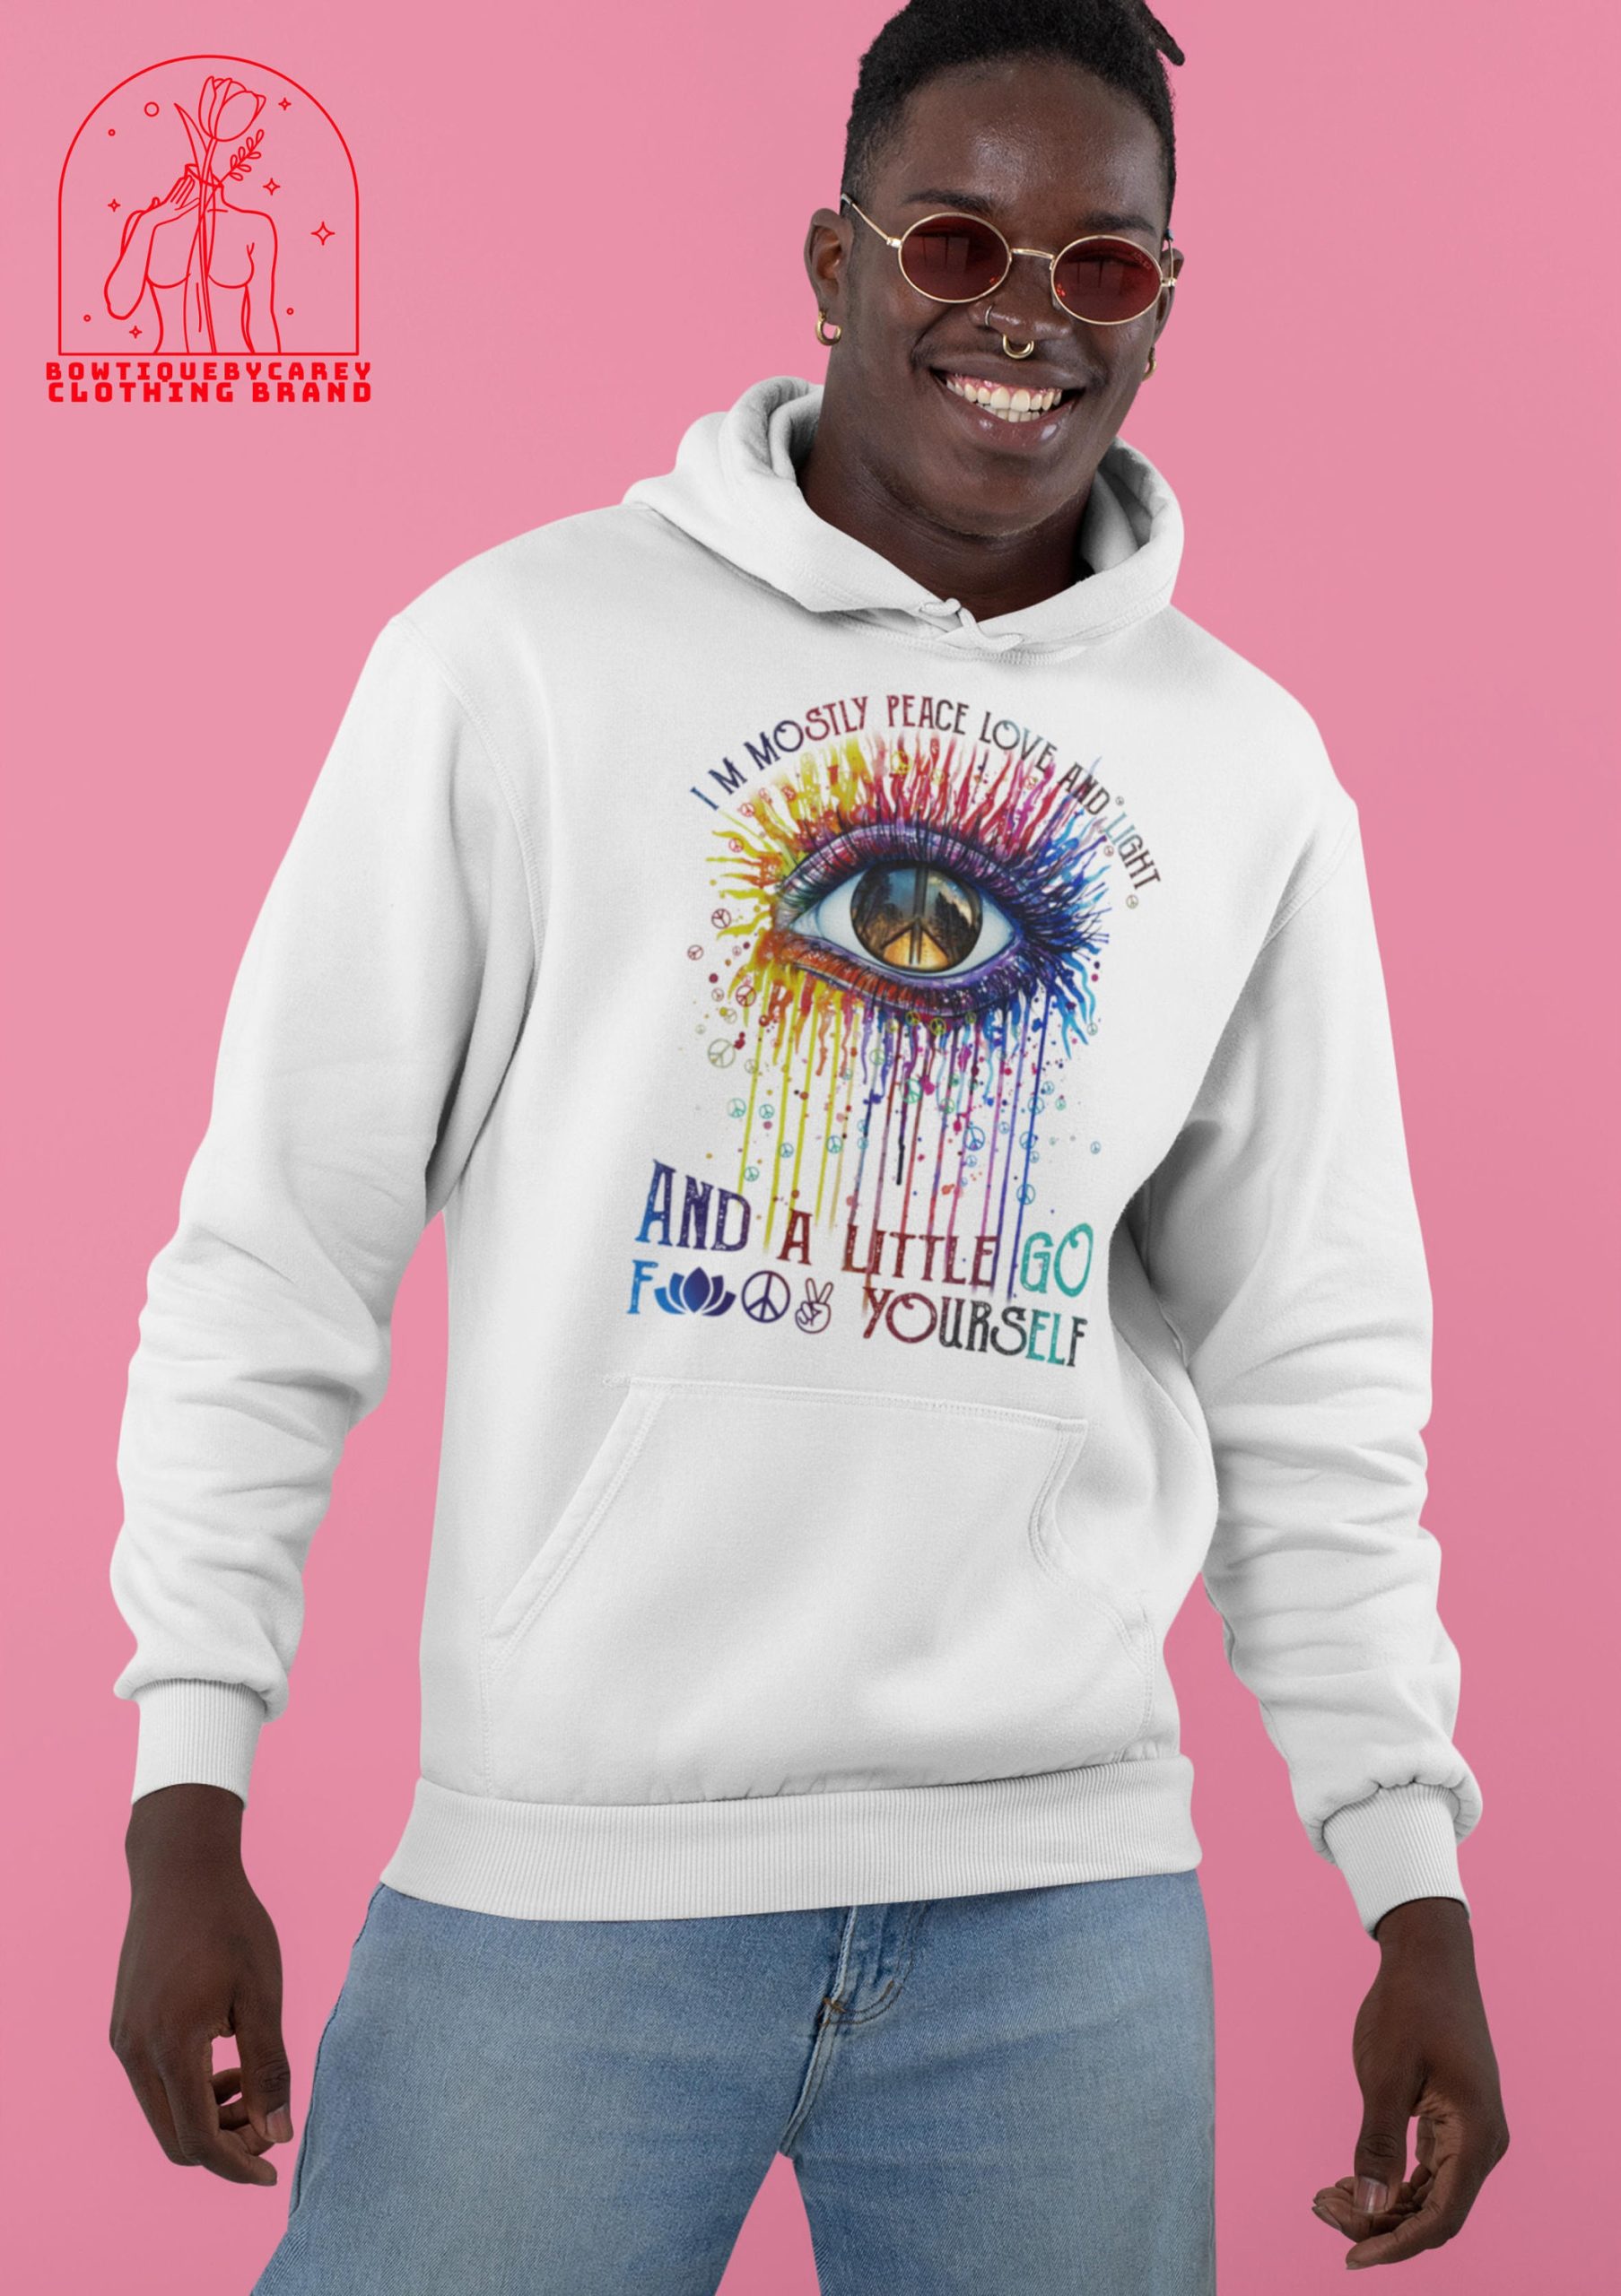 I'm Mostly Peace Love And Light And A Little Go Fuck Yourself Color Eye Peace Unisex T-Shirt